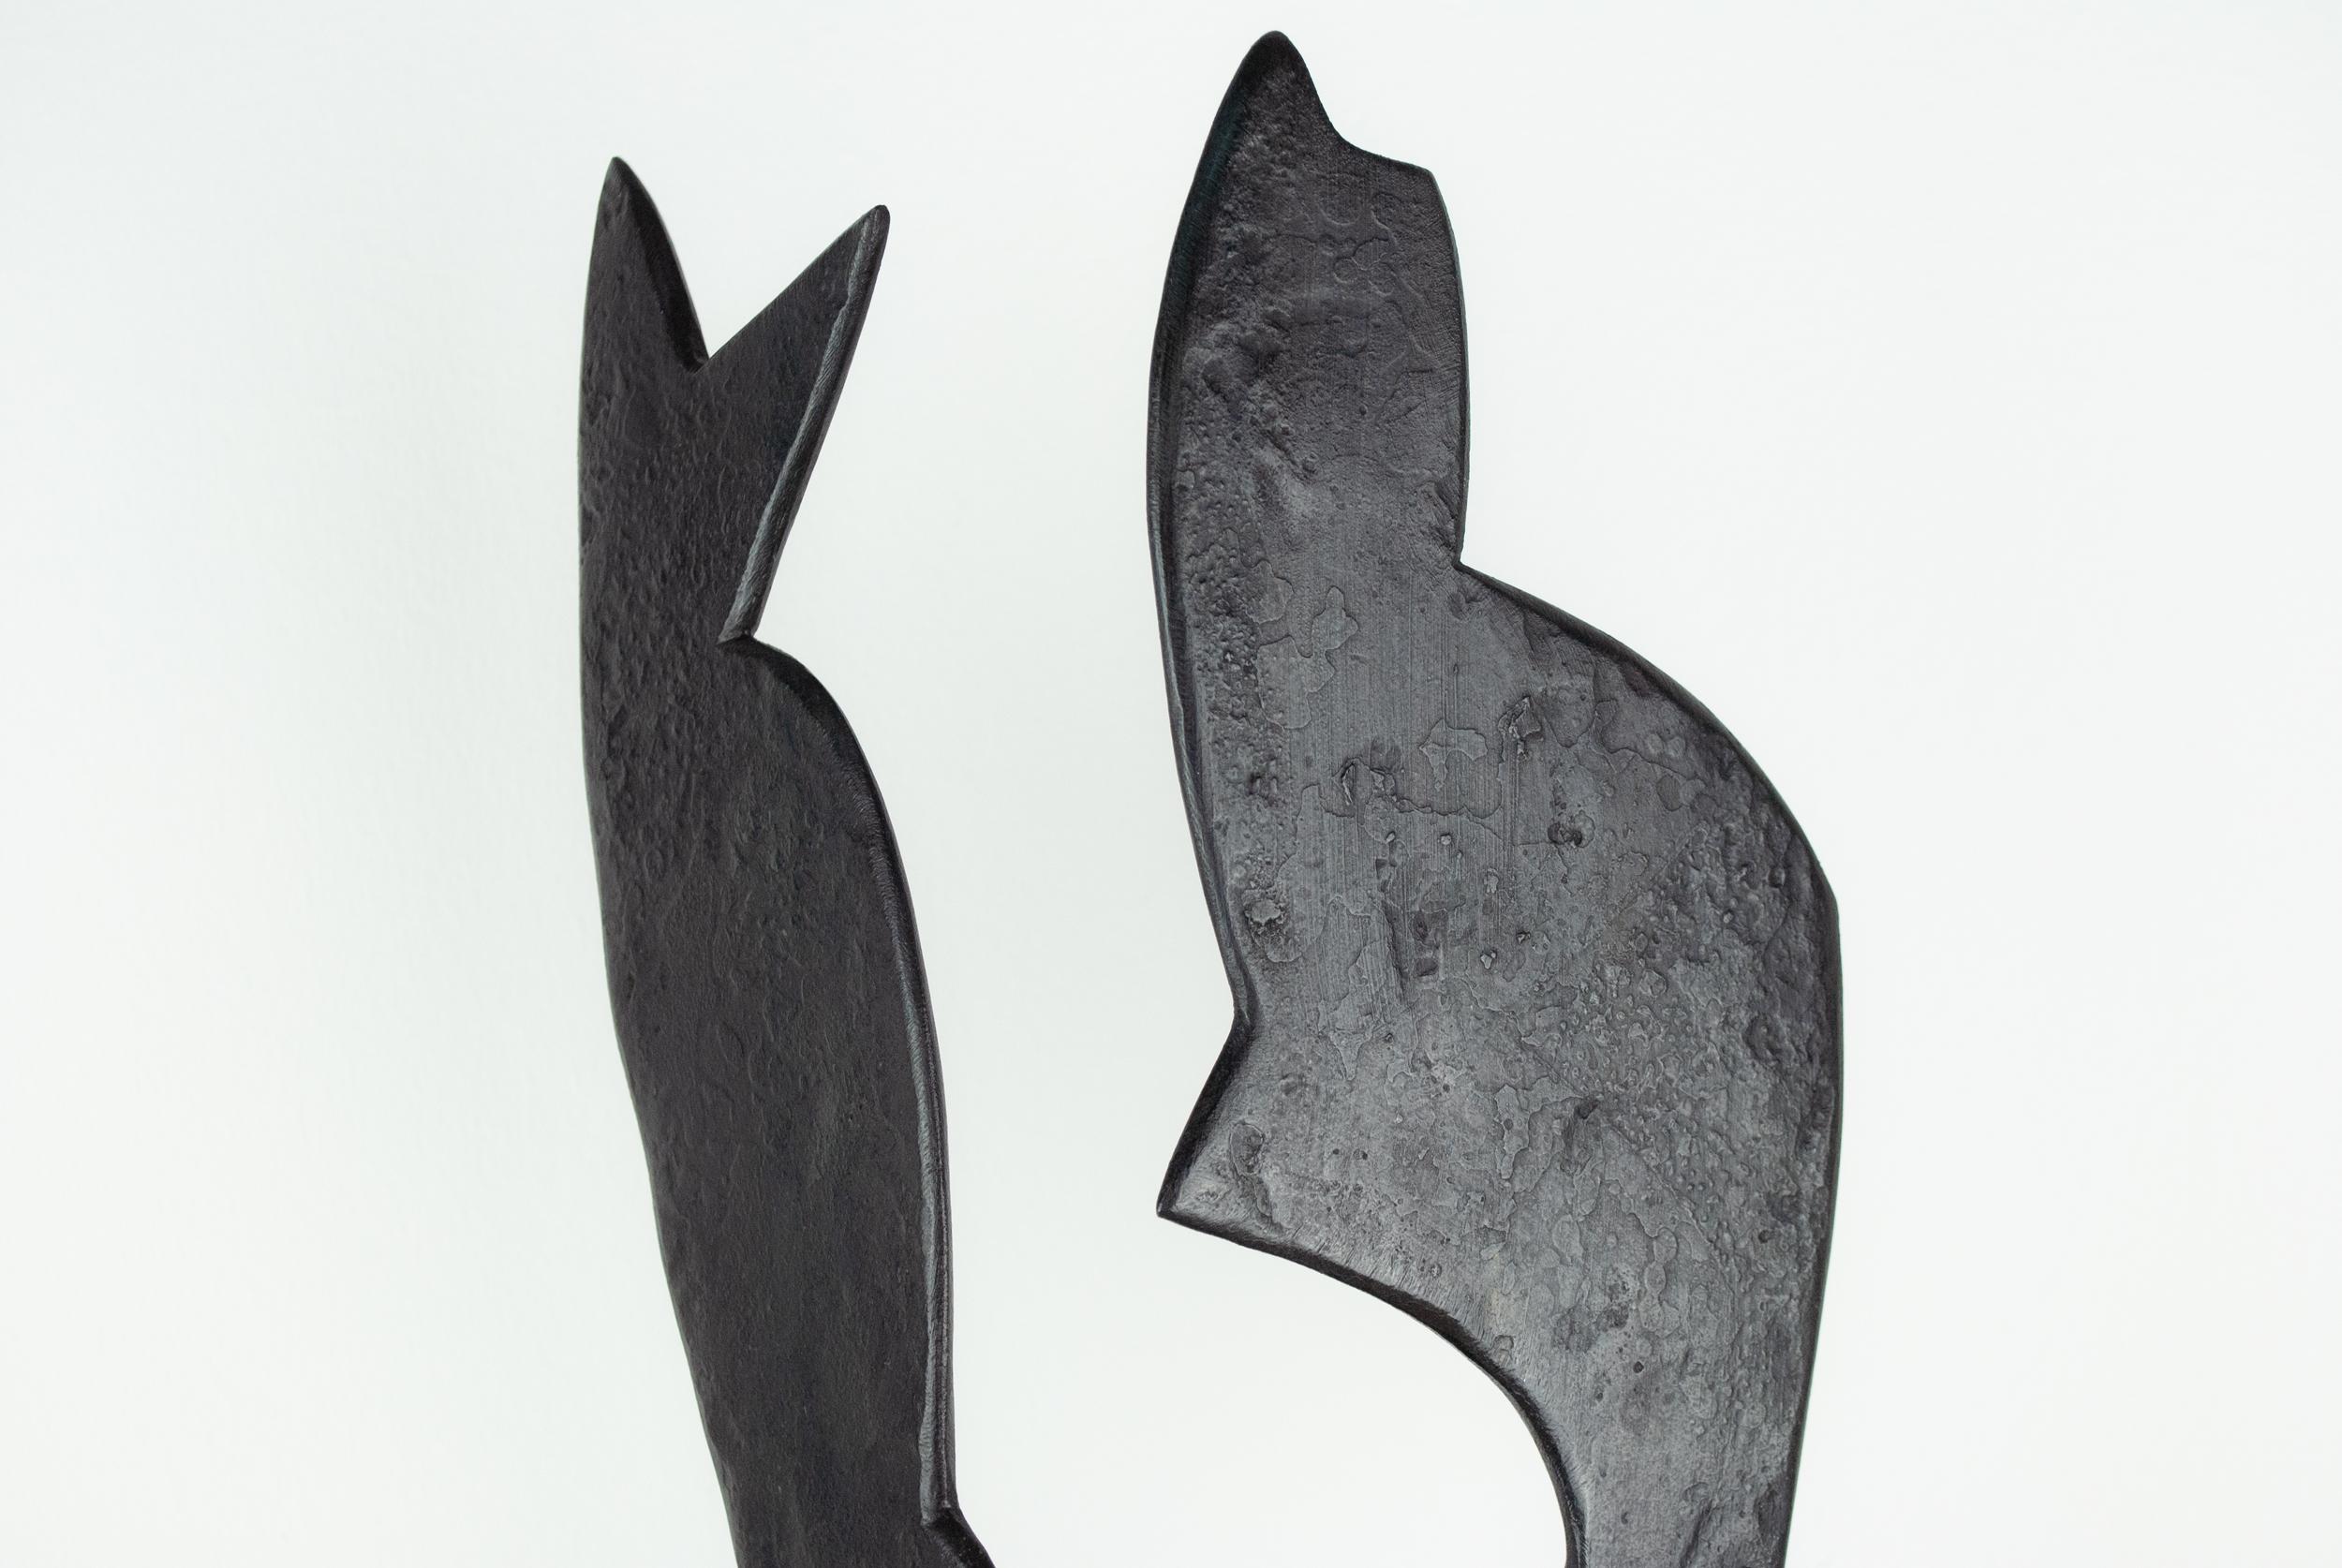 Black forged steel, abstract sculpture. Composition of two abstract forms sit on a diamond shaped base. The forms are set at angles to one another to express a three dimensional relationship. The two forms create a negative space between them that